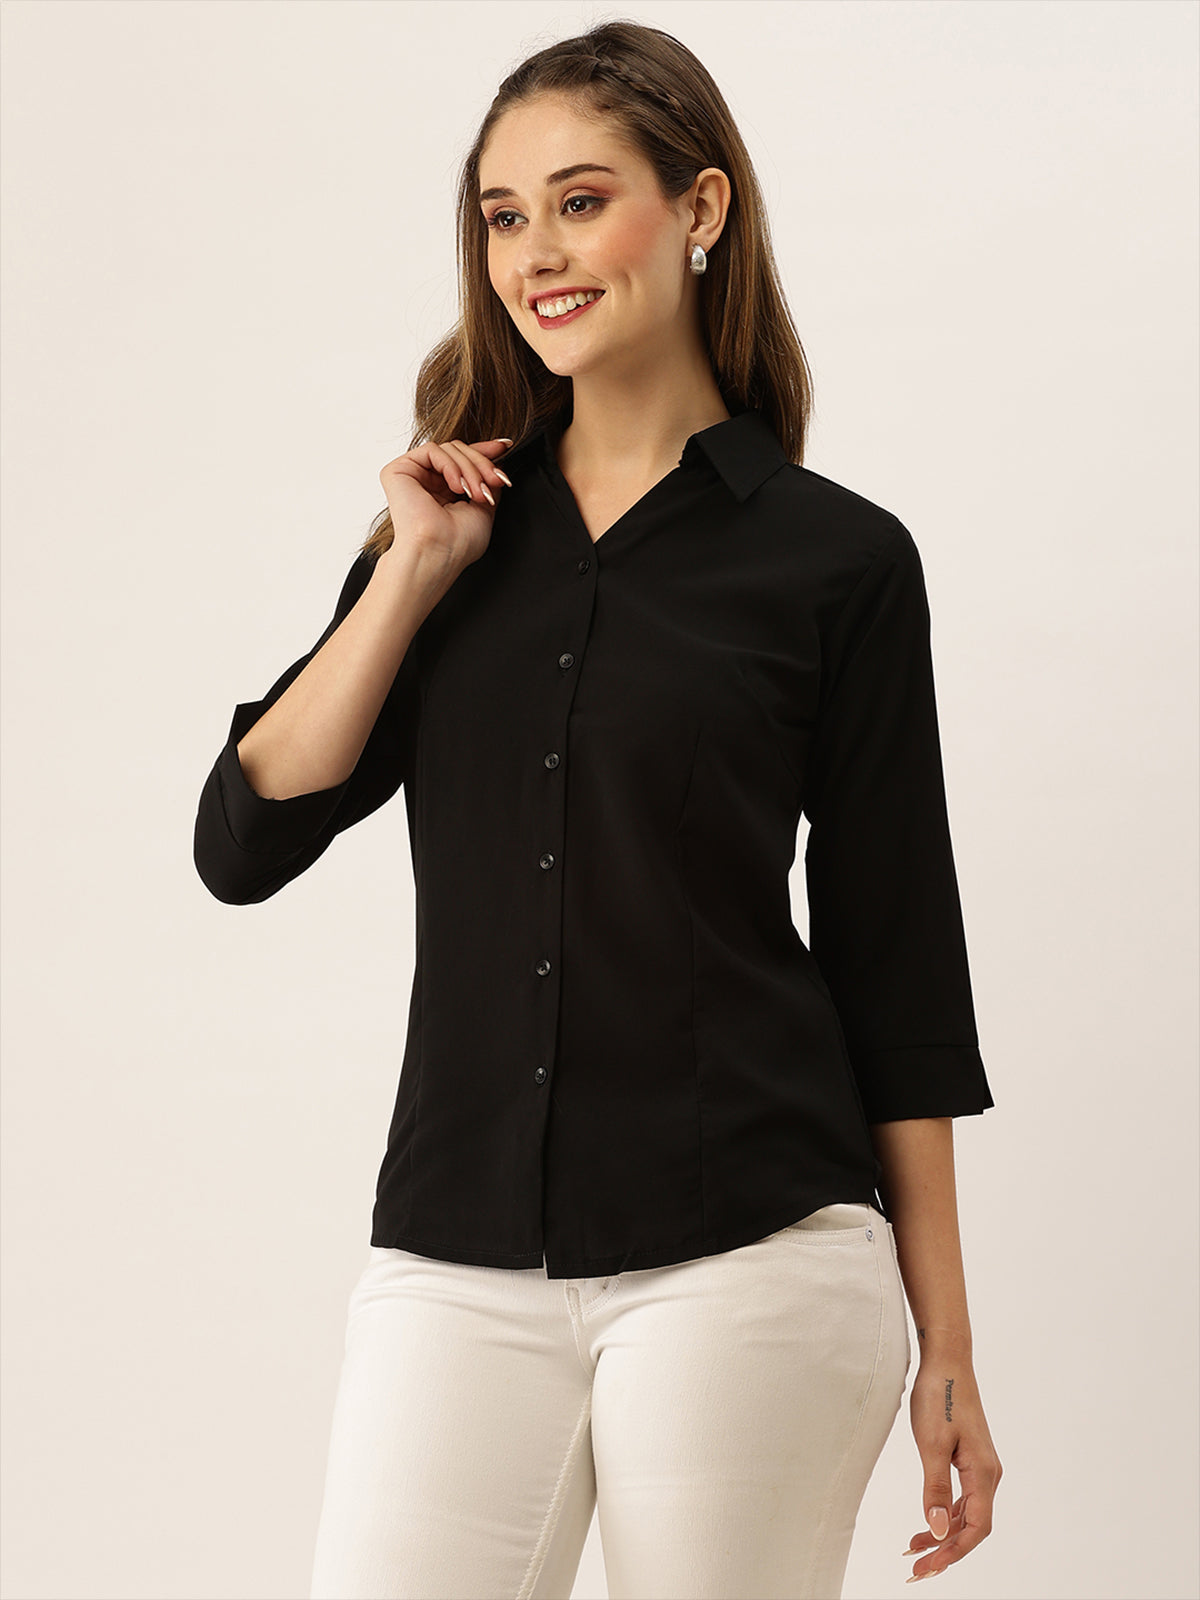 Odette Black Synthetic Solid Stitched Shirt For Women